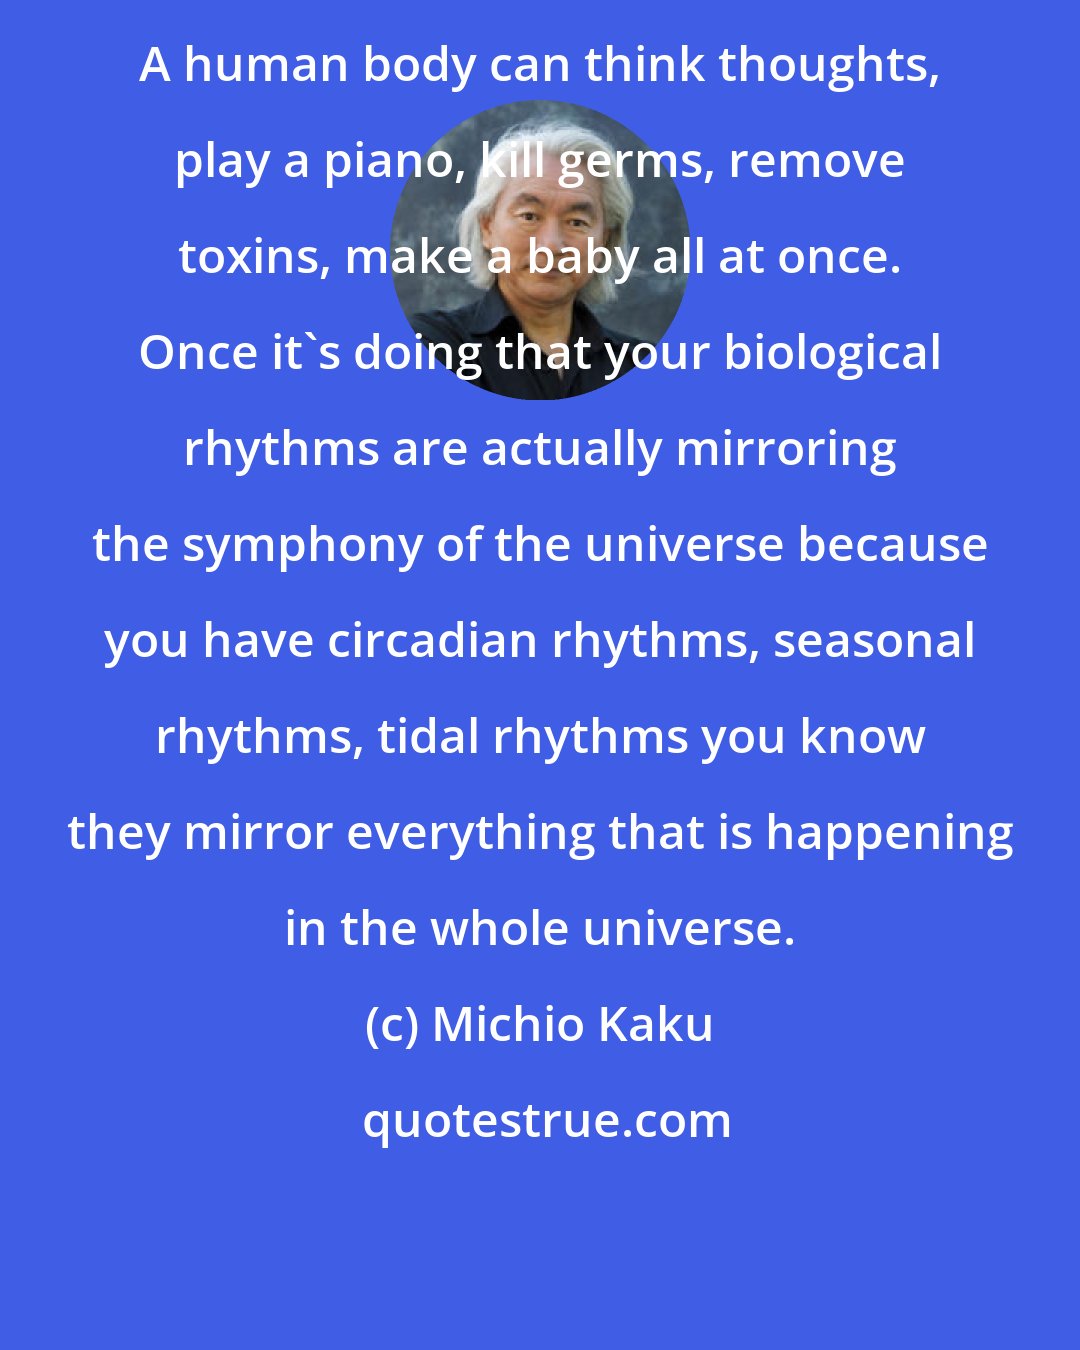 Michio Kaku: A human body can think thoughts, play a piano, kill germs, remove toxins, make a baby all at once. Once it's doing that your biological rhythms are actually mirroring the symphony of the universe because you have circadian rhythms, seasonal rhythms, tidal rhythms you know they mirror everything that is happening in the whole universe.